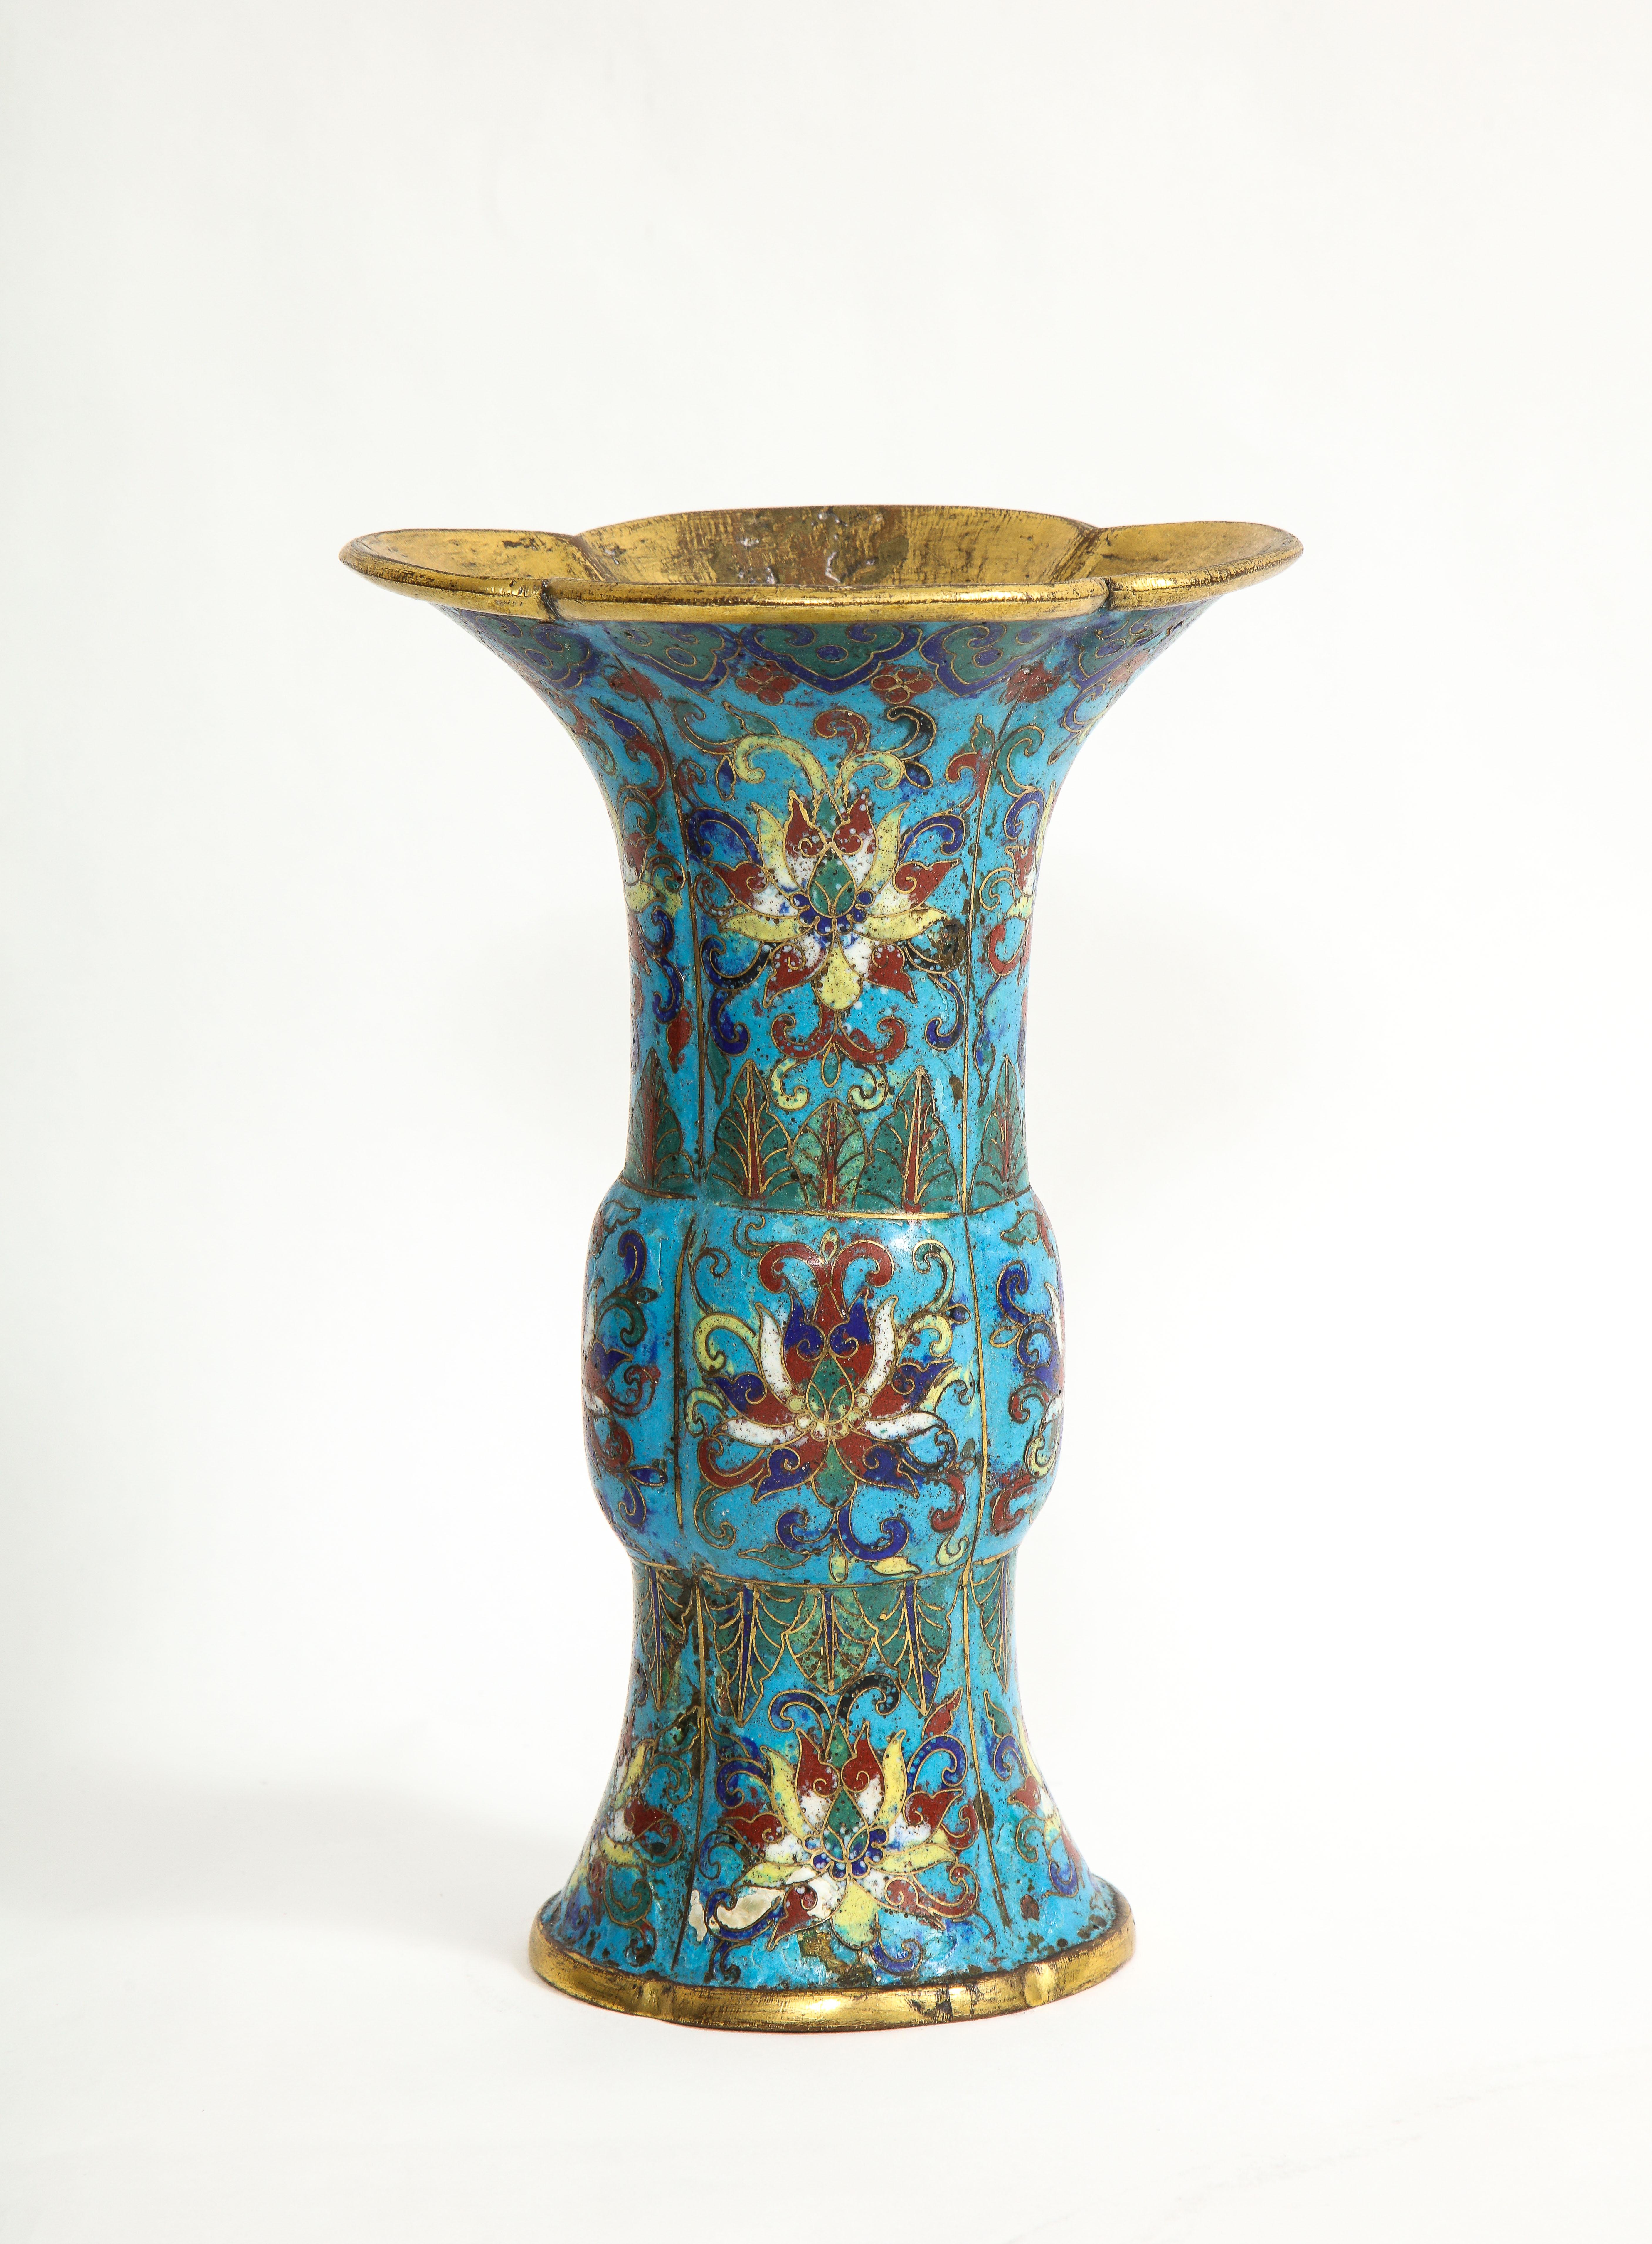 A Fantastic, rare, and antique Chinese Cloisonné Enamel Gu Form vase, 17th/18th century, Kangxi Period. This cloisonne vase is extremely rare to find in this quality, condition, age, and size. This was made in the Kangxi period anywhere from 1690 to